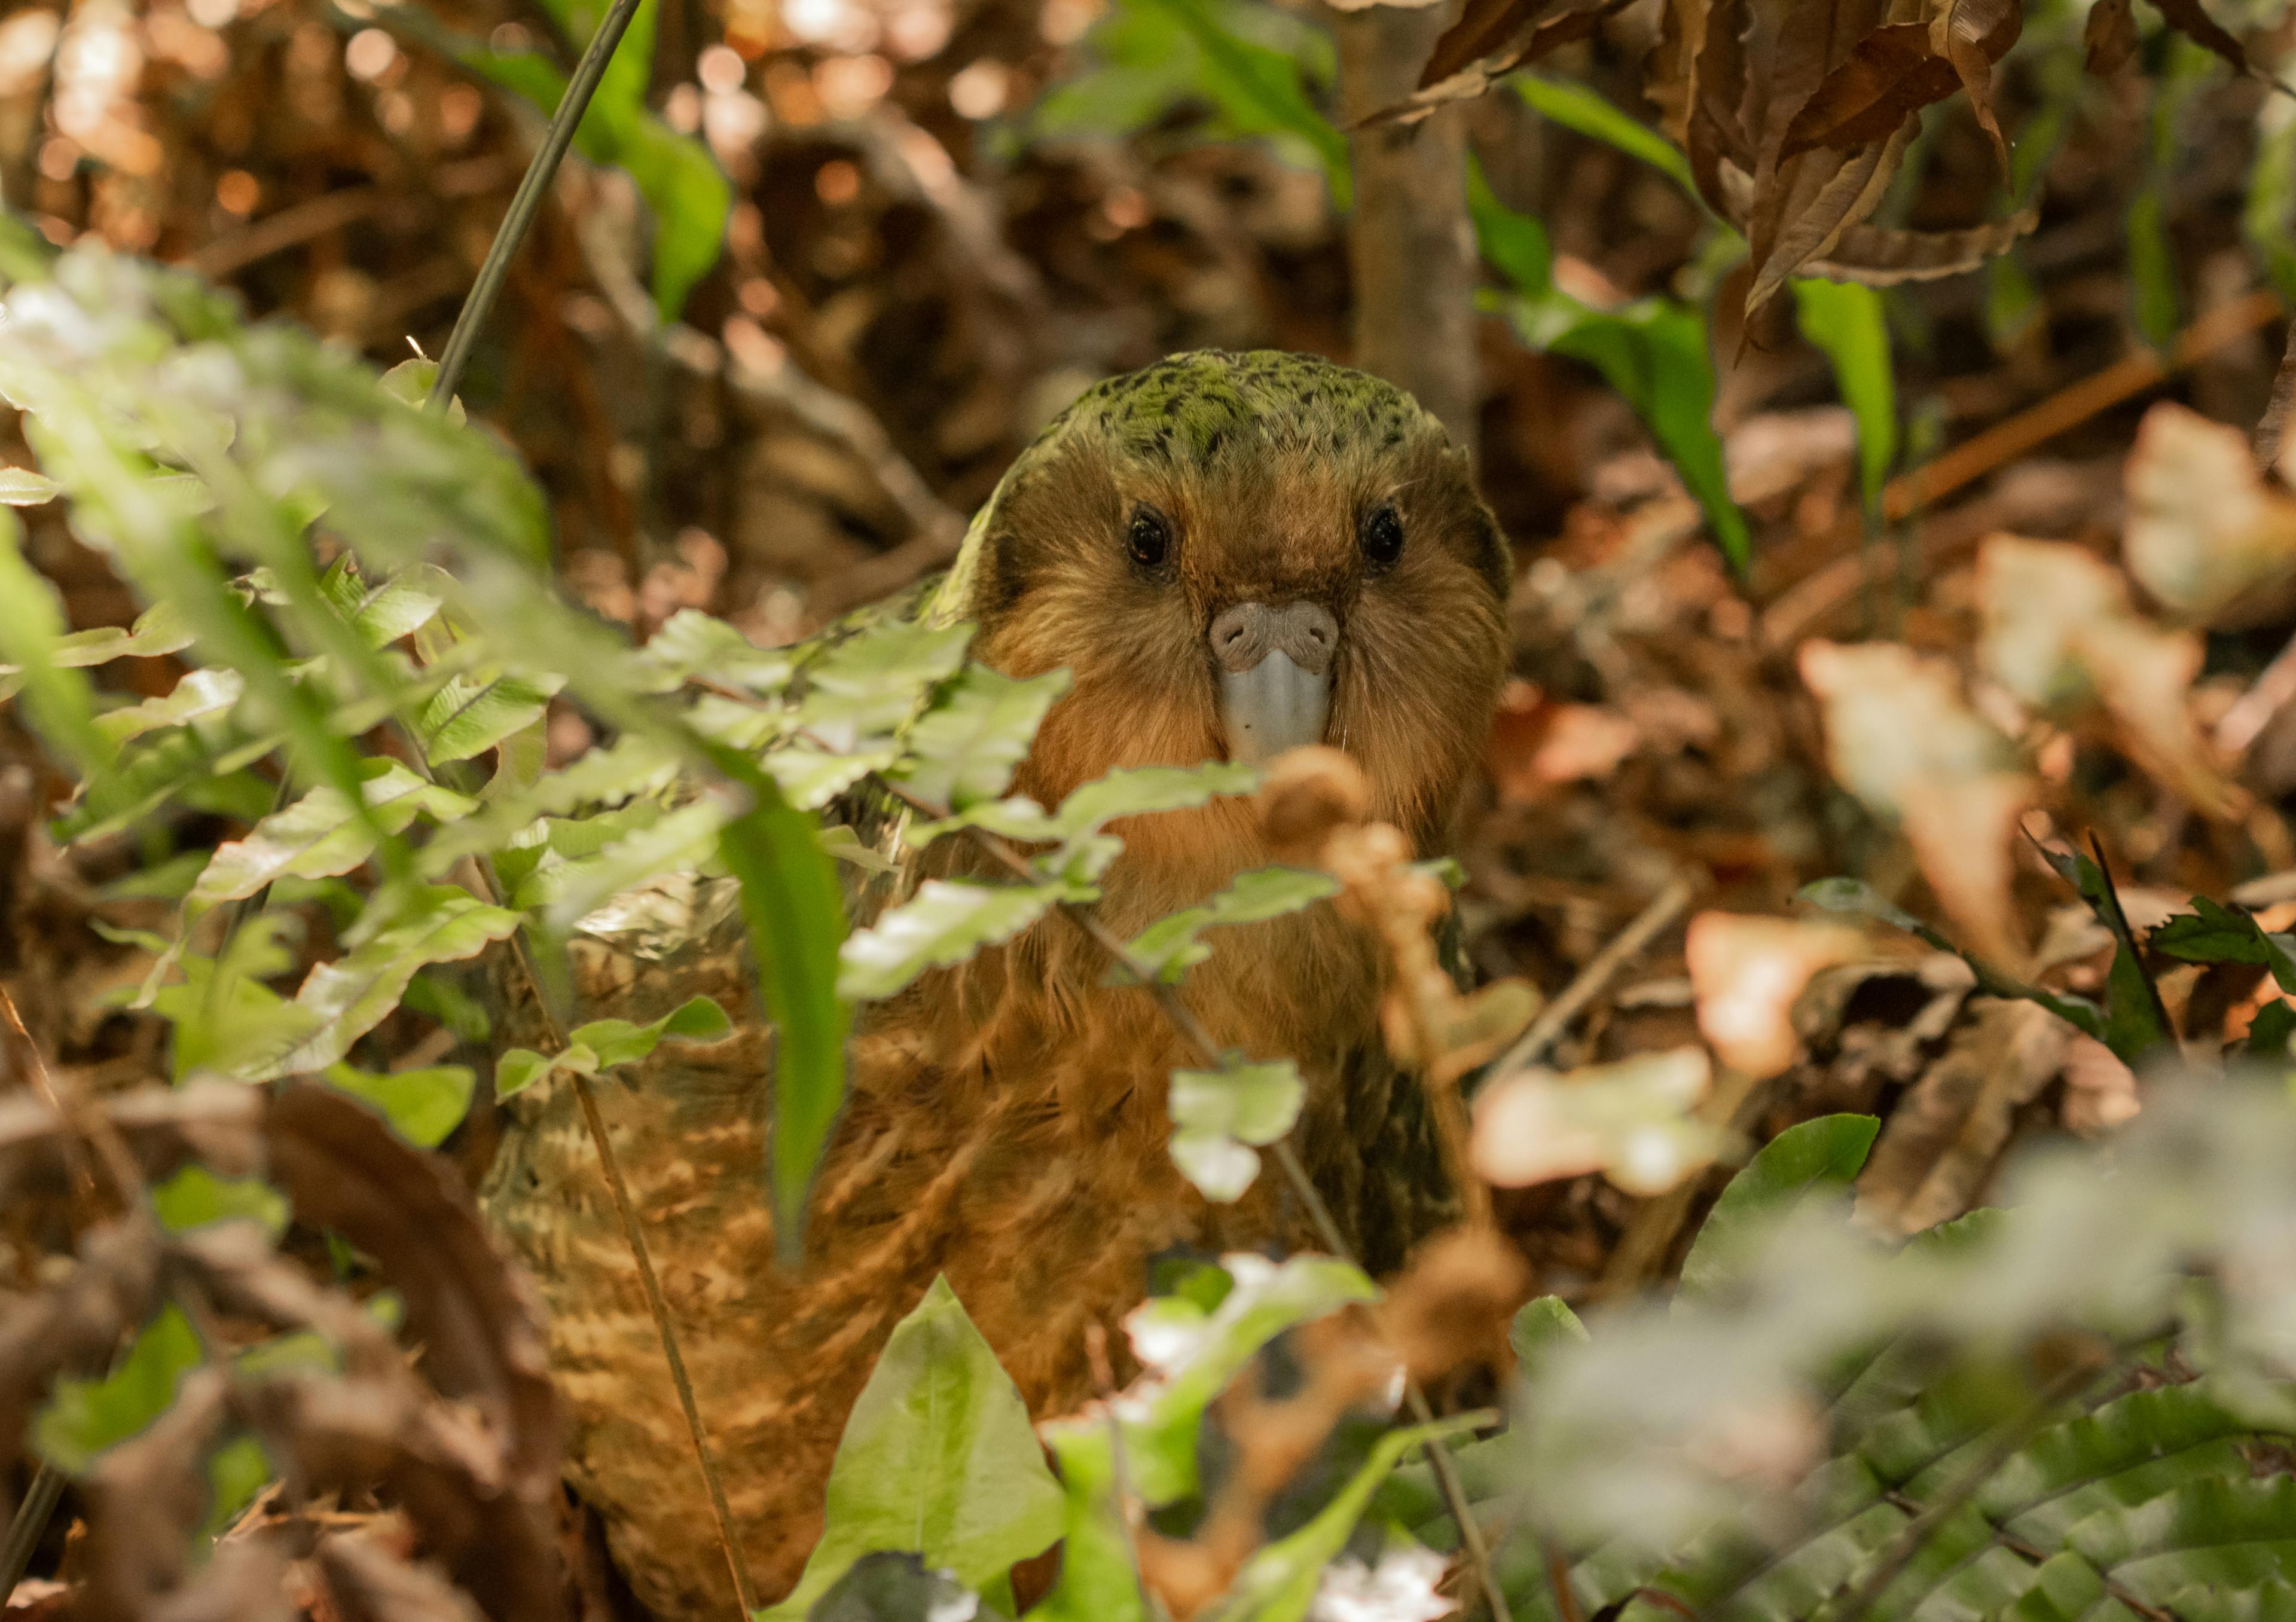 A kakapo using it's camouflage. This is an endangered parrot from New Zealand.  